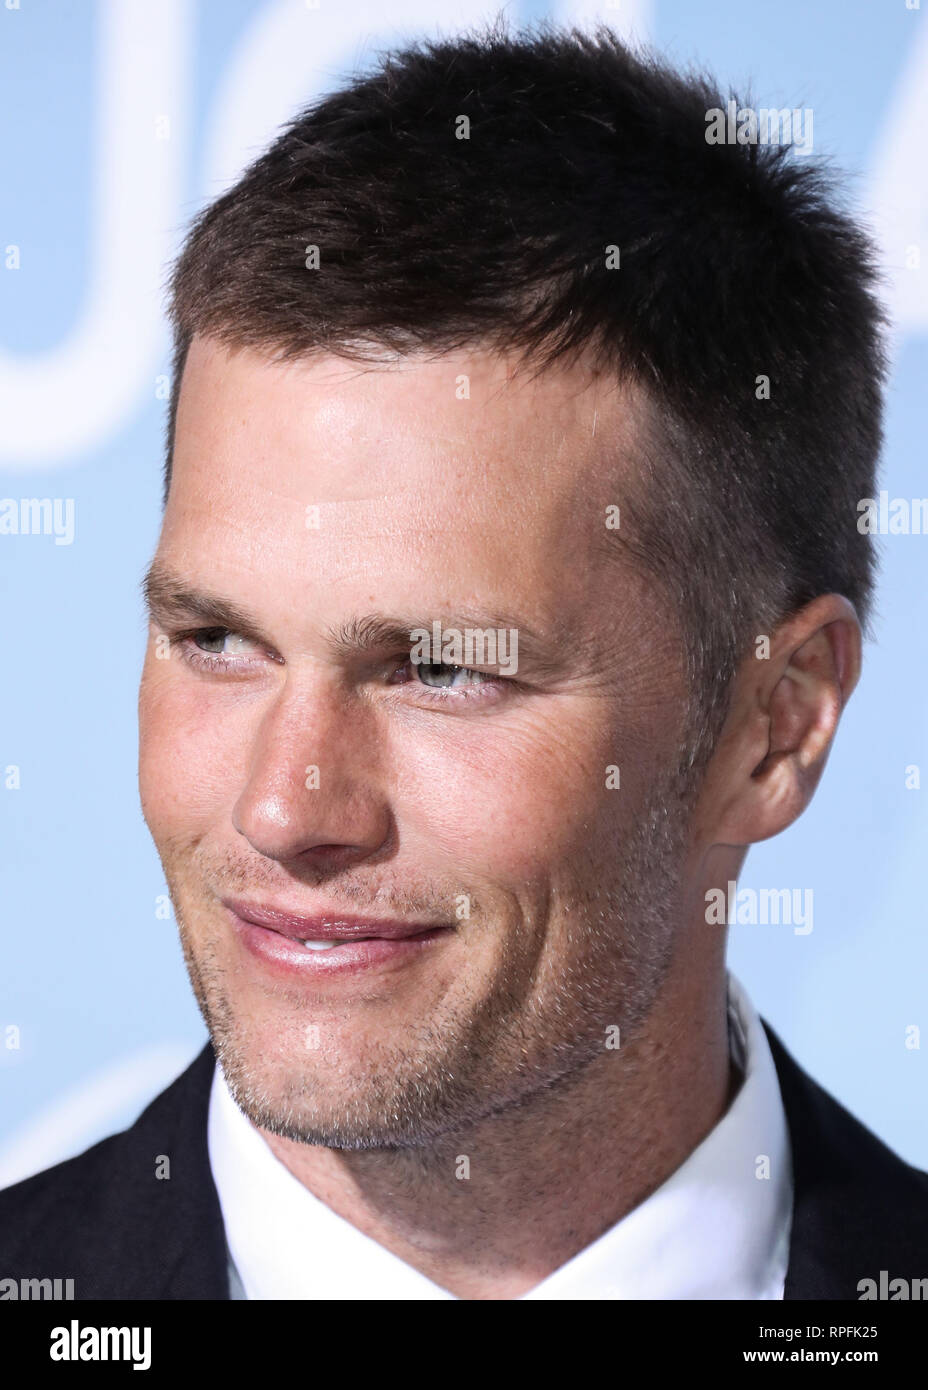 Football quarterback Tom Brady arrives at the 2019 Hollywood For Science Gala held at a Private Estate on February 21, 2019 in Beverly Hills, Los Angeles, California, United States. (Photo by Xavier Collin/Image Press Agency) Stock Photo